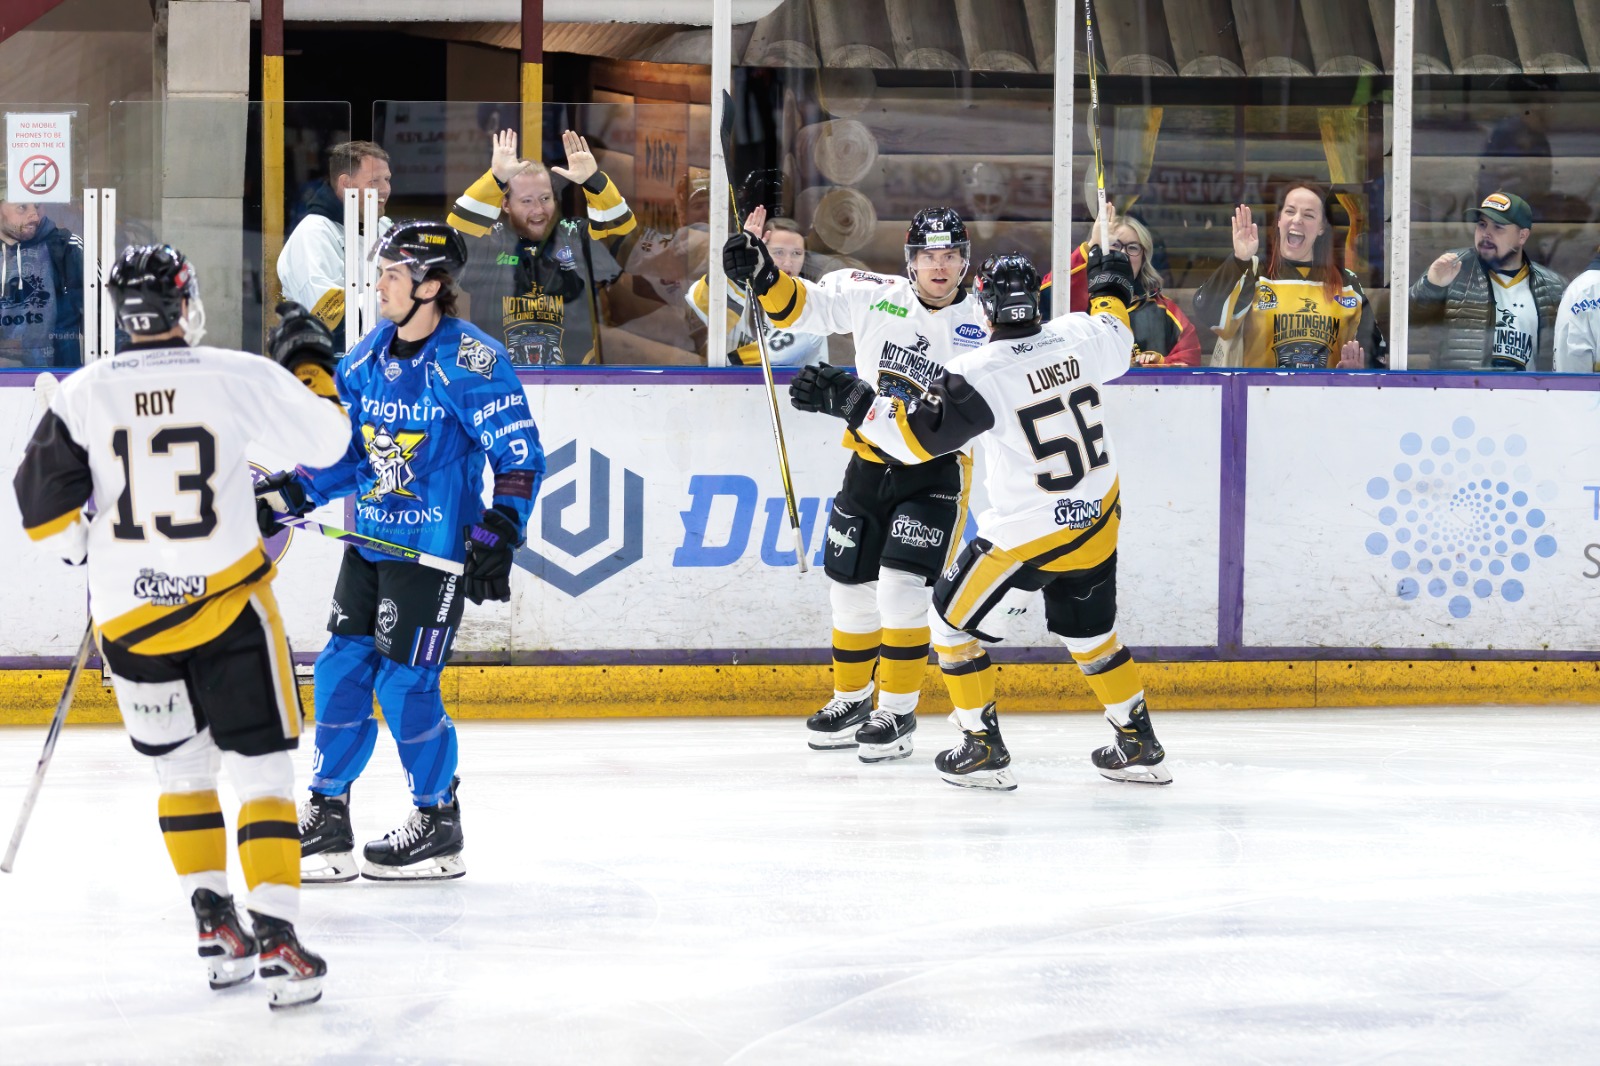 PREVIEW: PANTHERS HOST STORM IN LEAGUE-OPENER Top Image